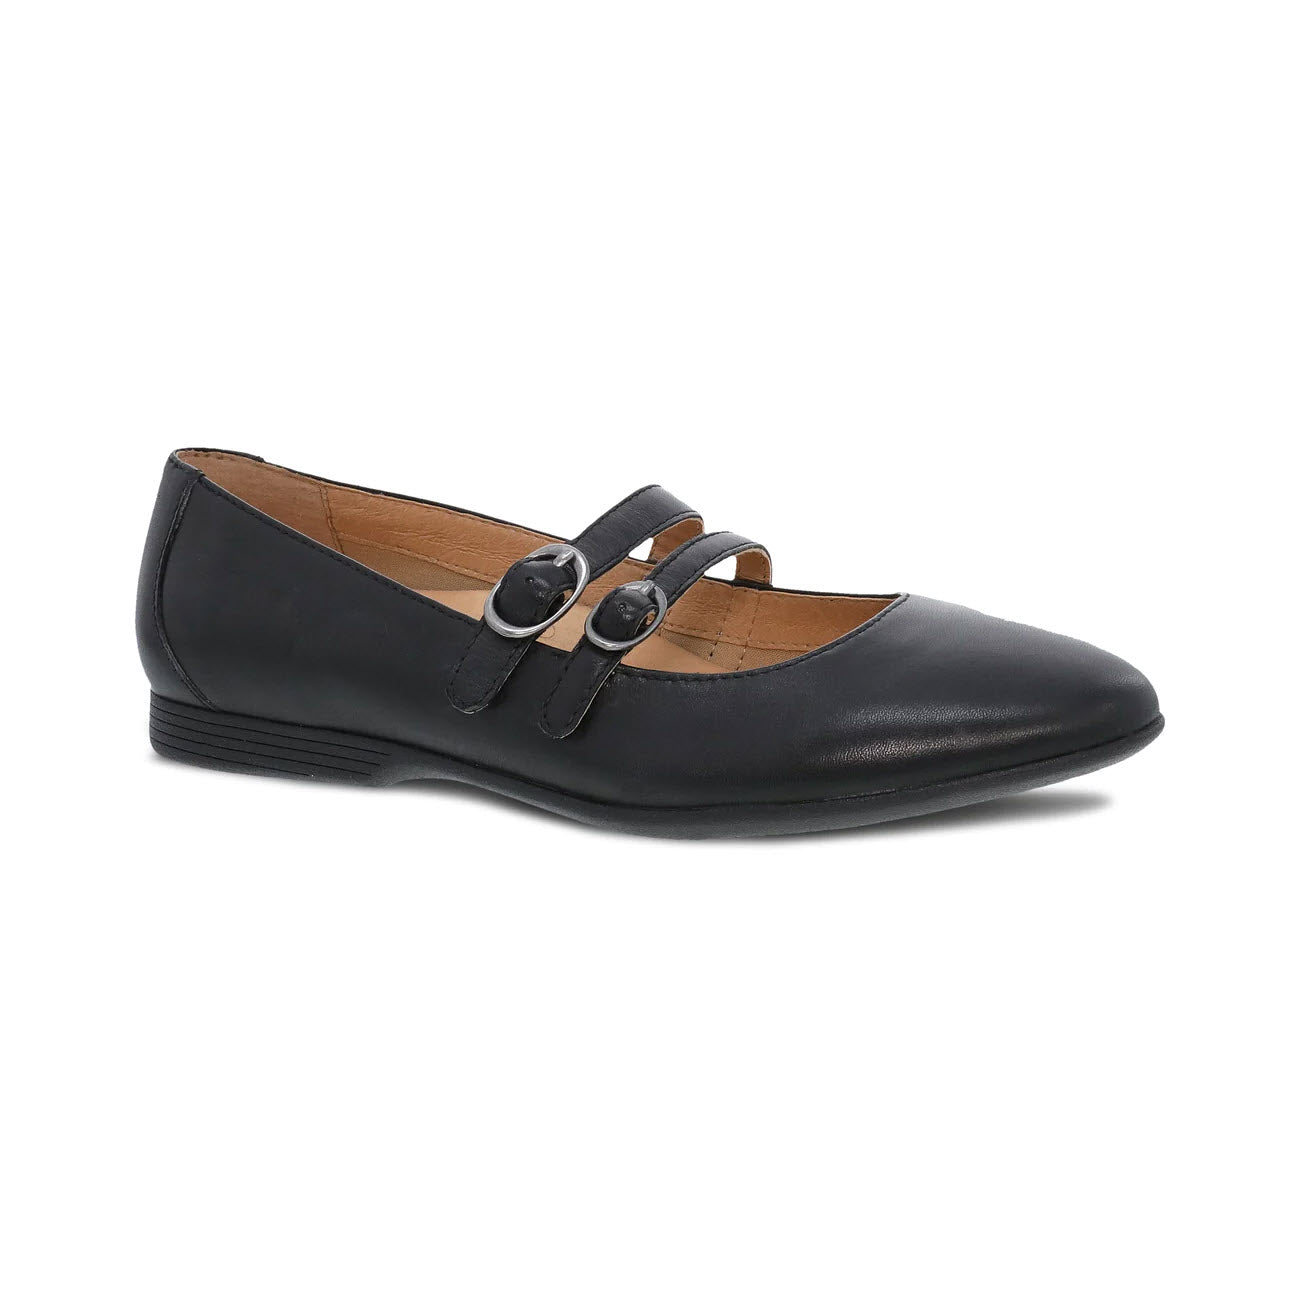 Dansko Leeza black leather mary jane-style shoe with a low heel and two adjustable straps across the top, isolated on a white background.